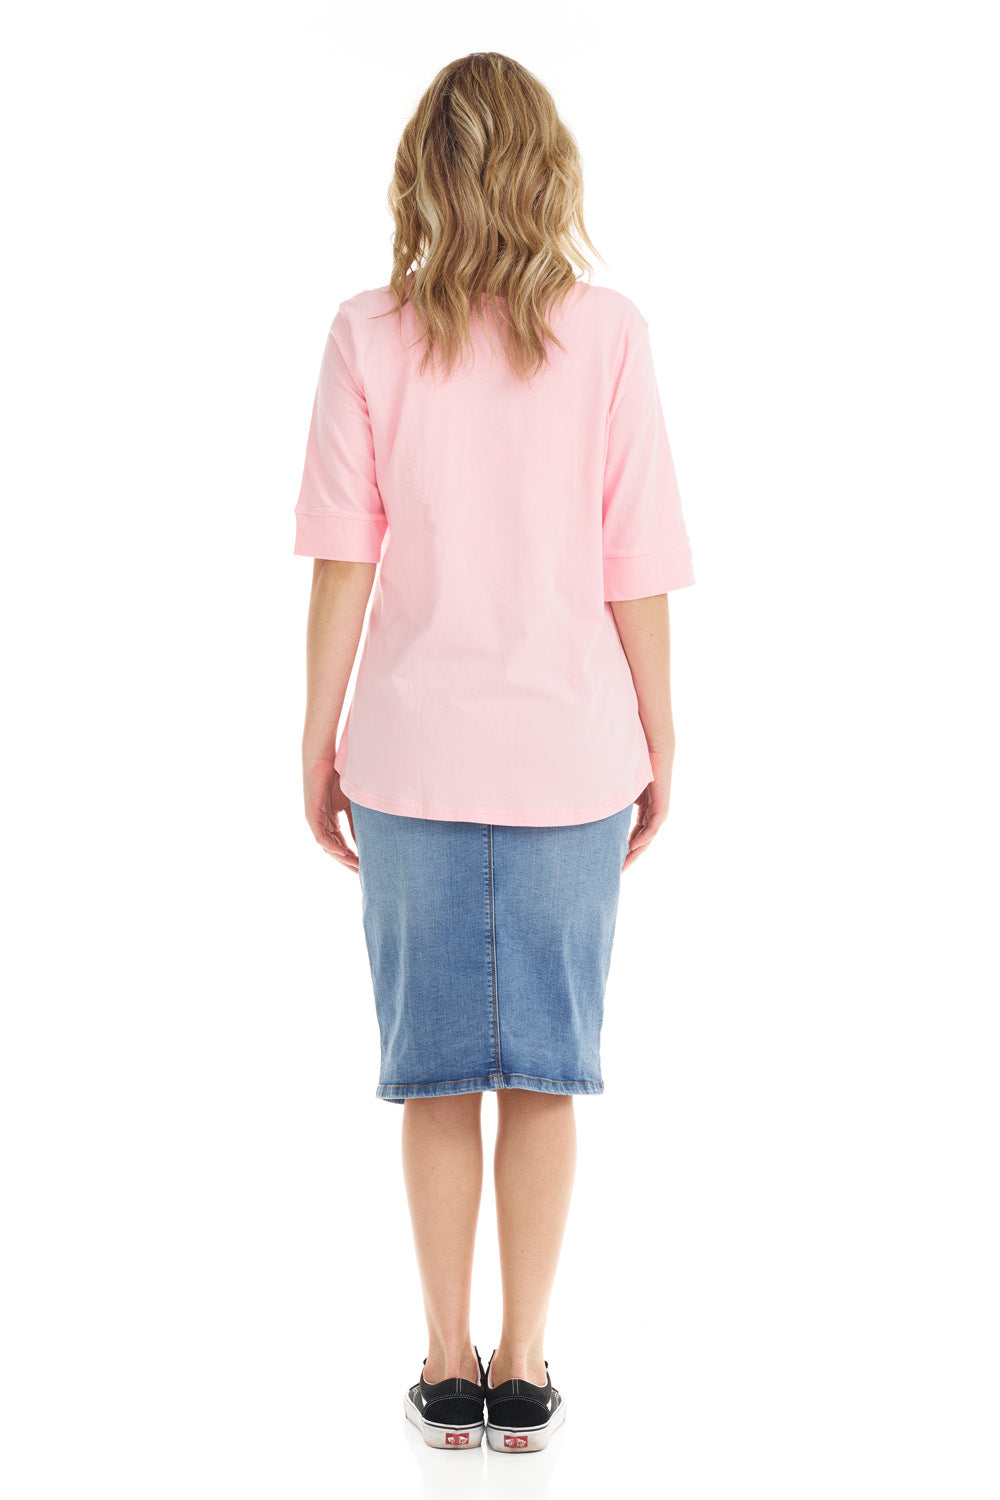 baby pink 3/4 cuff sleeve tshirt for women